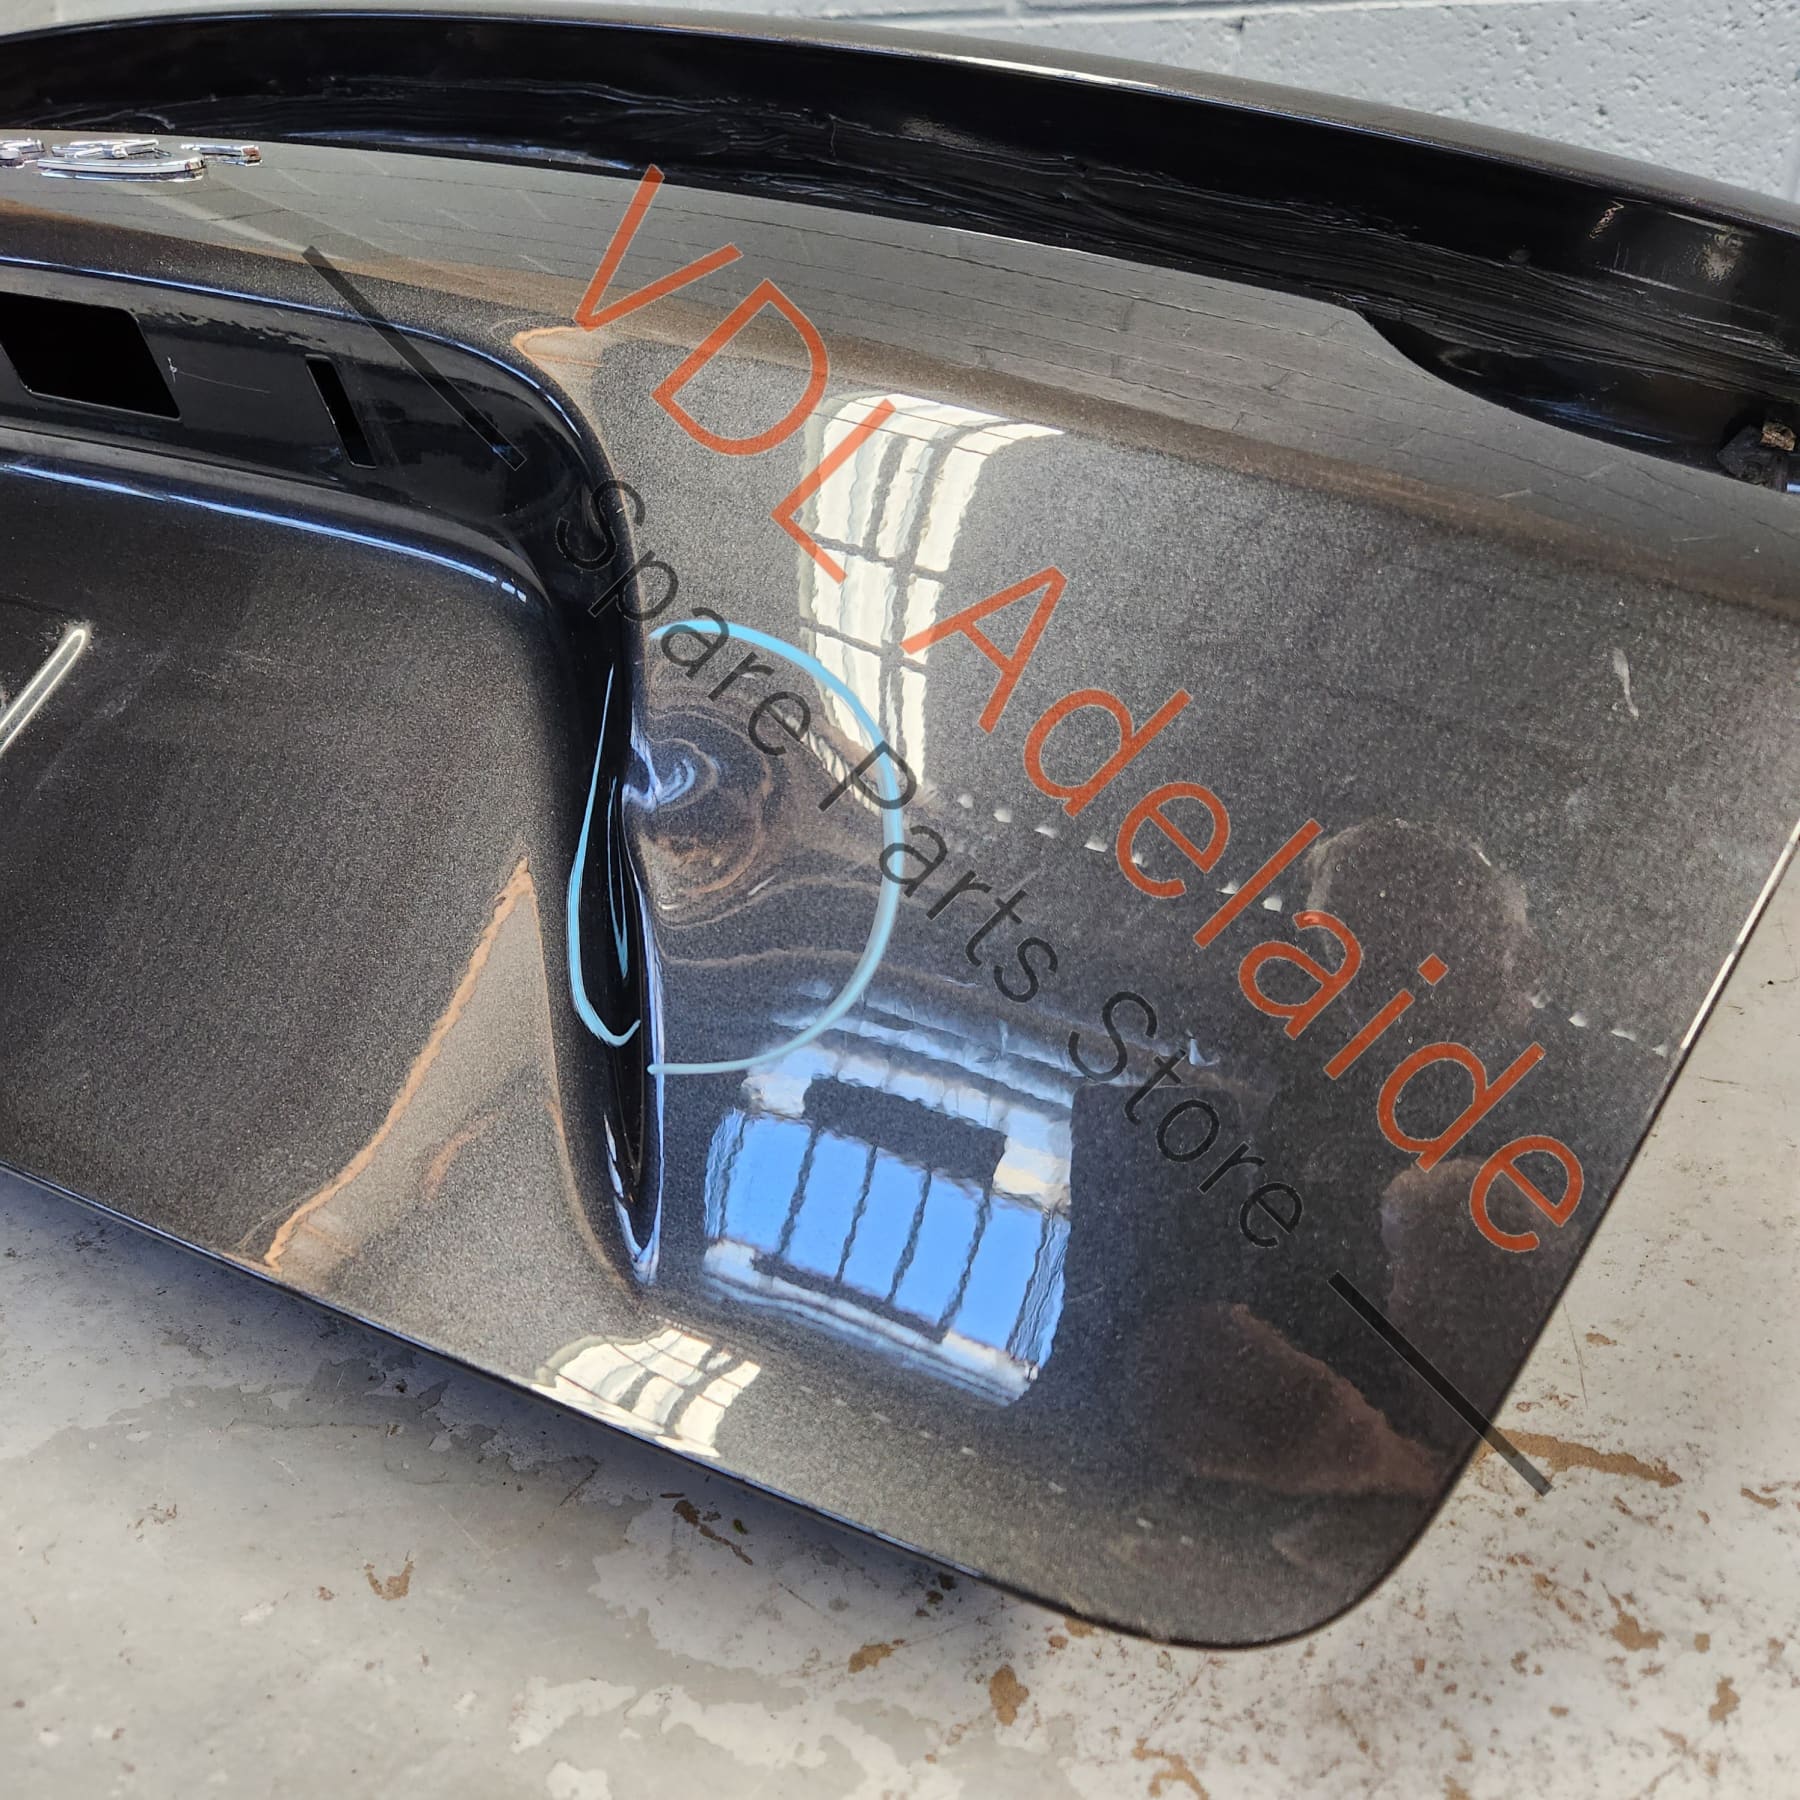 Porsche Panamera Turismo Rear Hatch Boot Trunk Panel Lid 974827025AYGRV 974827025CYGRV     Includes Glass & Badges. 1 x Small dent near number plate mount.